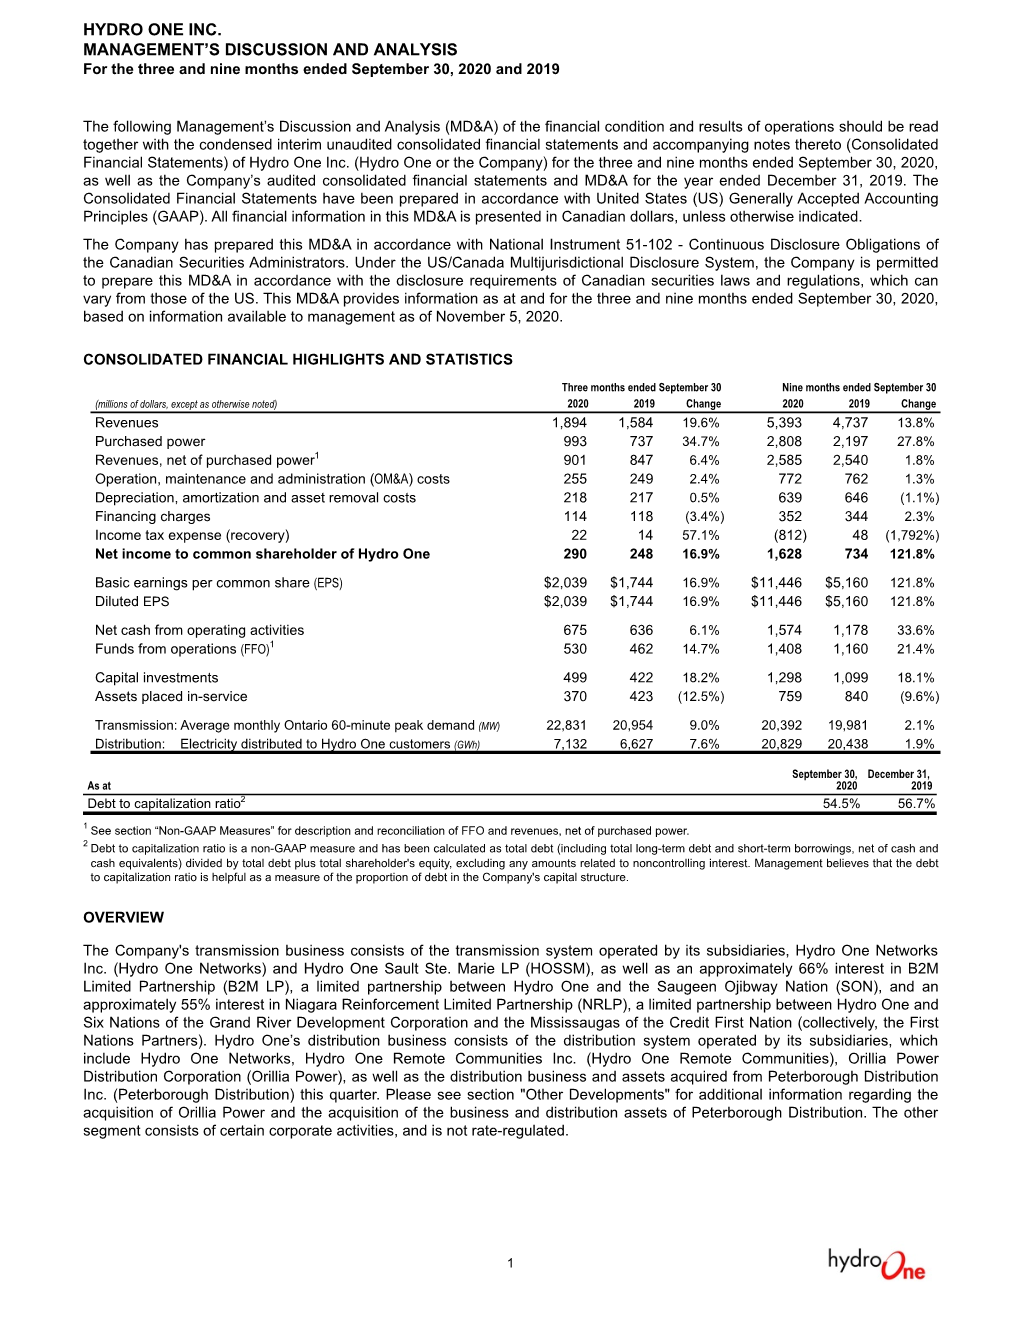 HYDRO ONE INC. MANAGEMENT’S DISCUSSION and ANALYSIS for the Three and Nine Months Ended September 30, 2020 and 2019